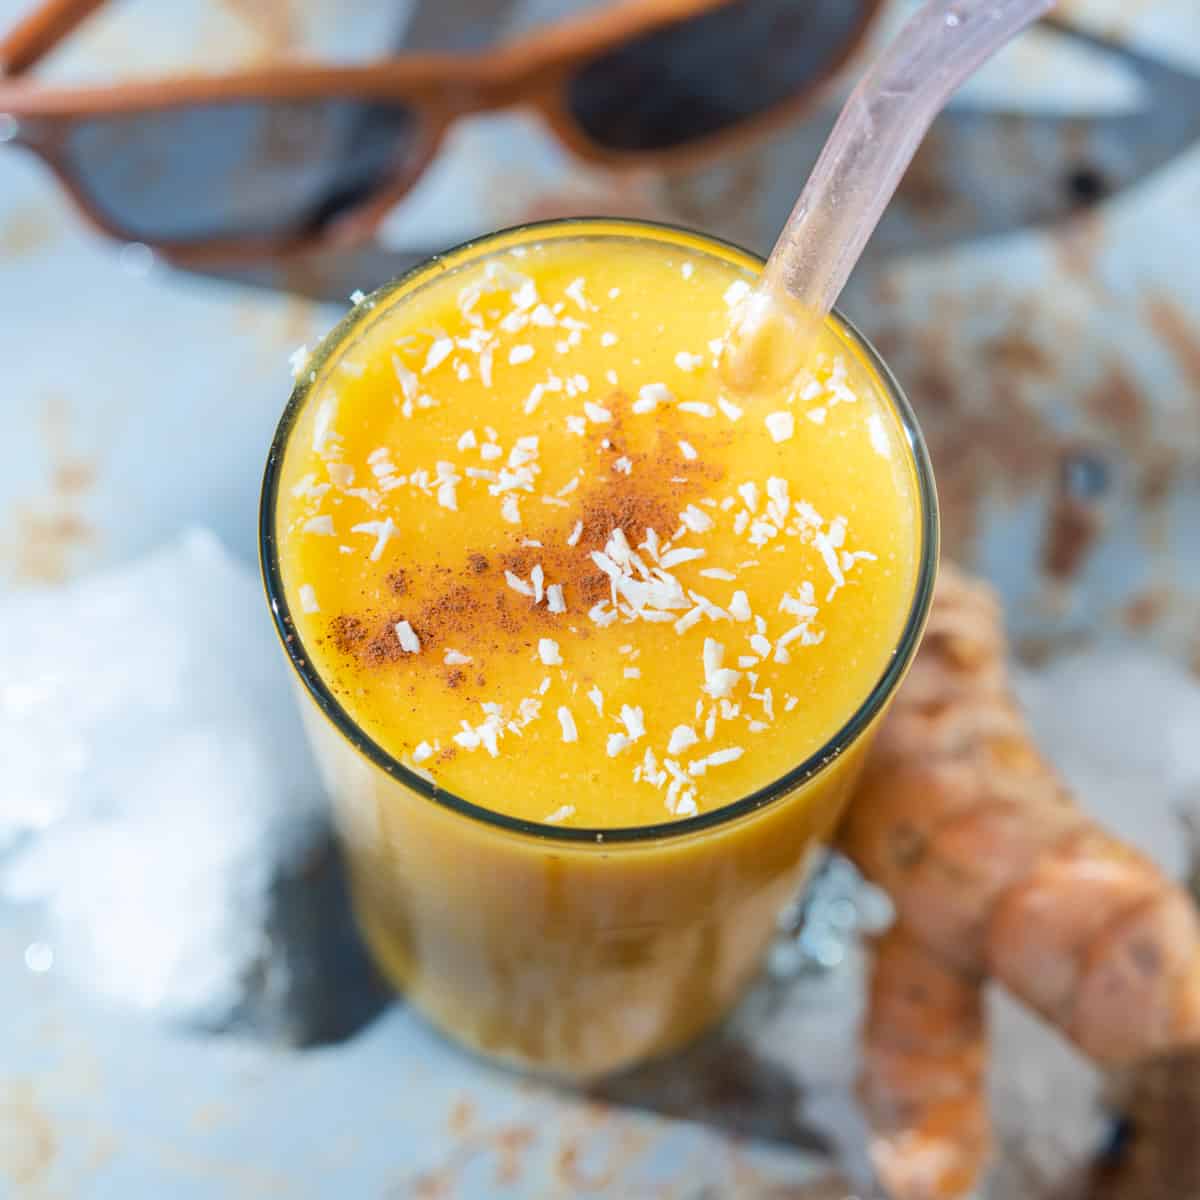 https://thefrayedapron.com/wp-content/uploads/2020/11/tropical-mango-pineapple-smoothie-with-turmeric-and-coconut.jpg